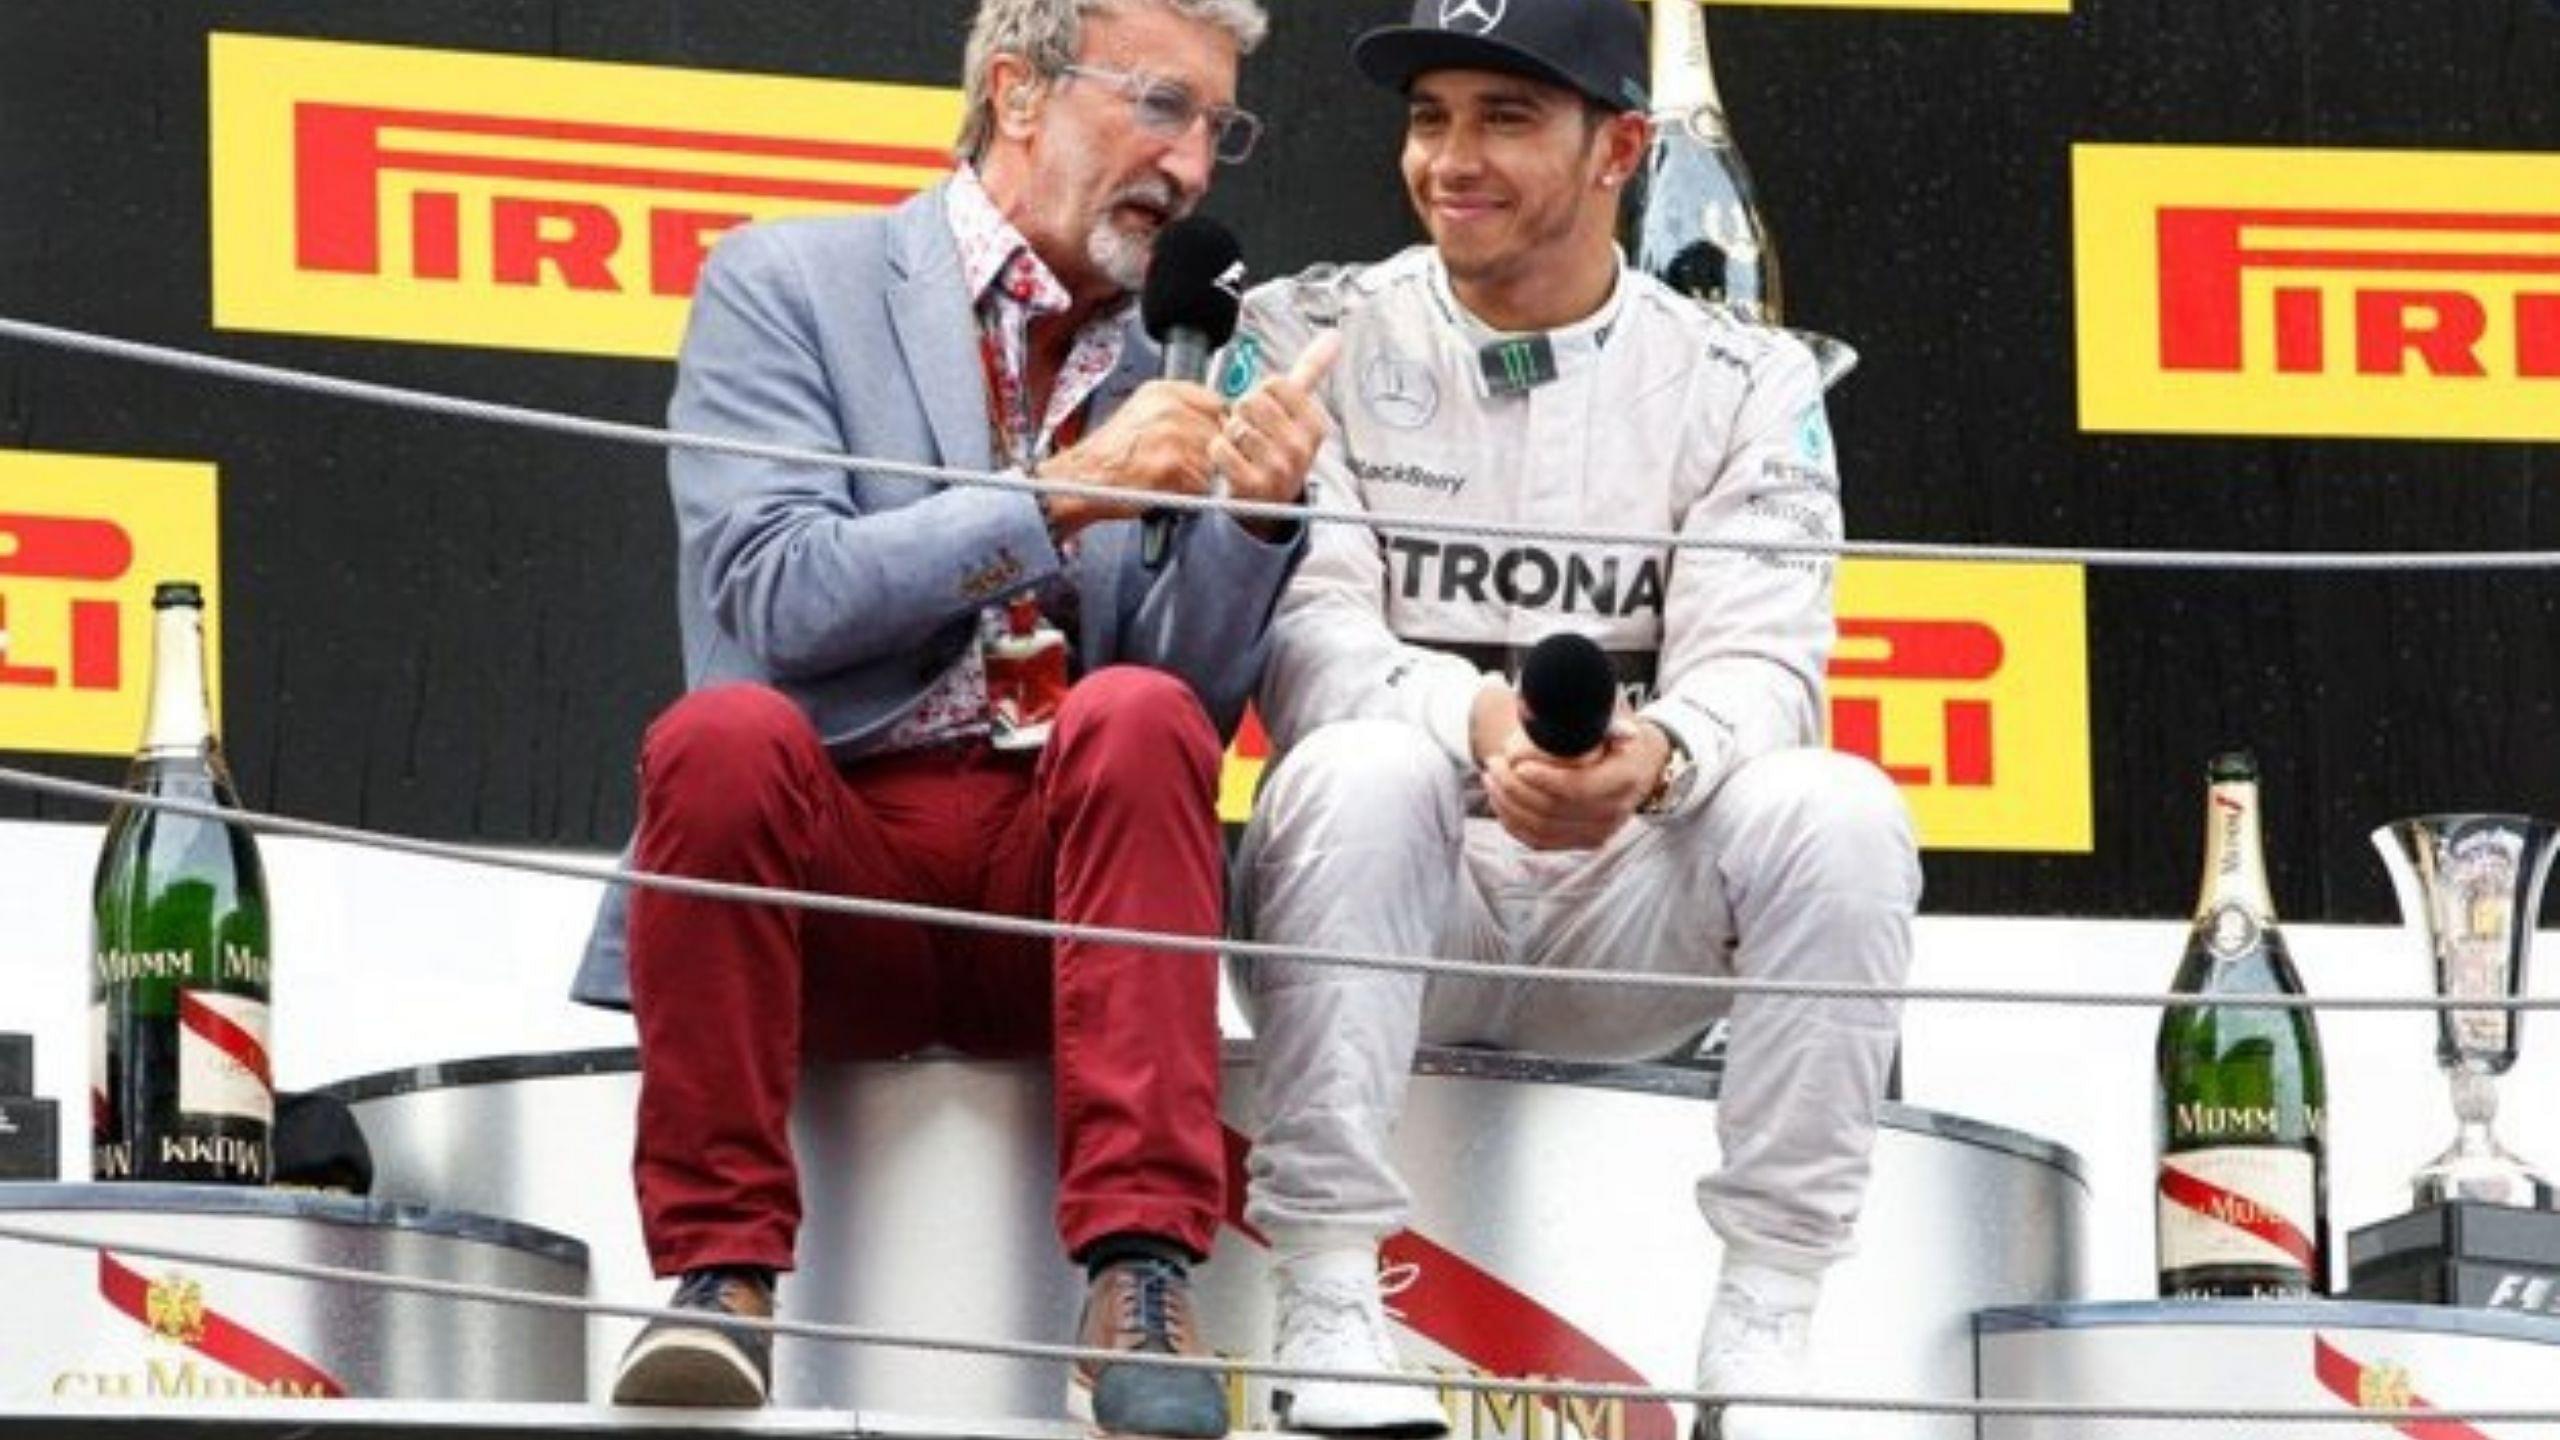 "No one can put their finger on Mercedes" - Eddie Jordan concerned with the unprecedented dominance of Mercedes and Lewis Hamilton